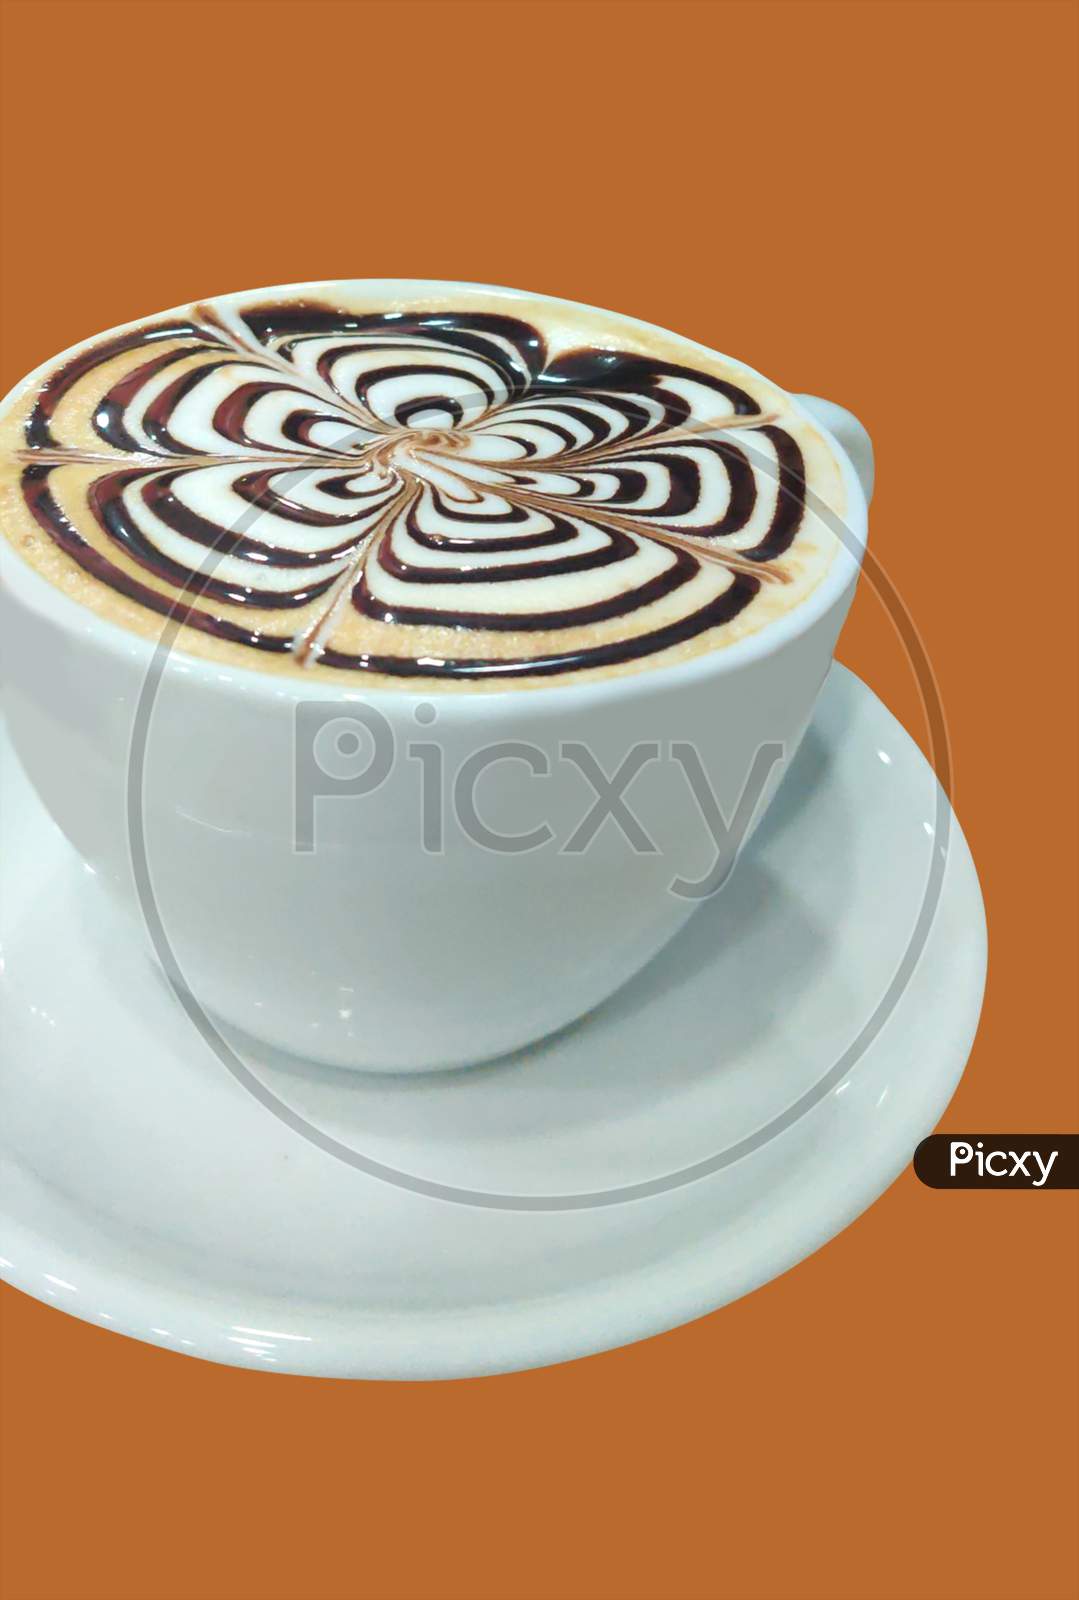 A Cup Of Coffee With Latte Art On Top Of It With Brown Background.